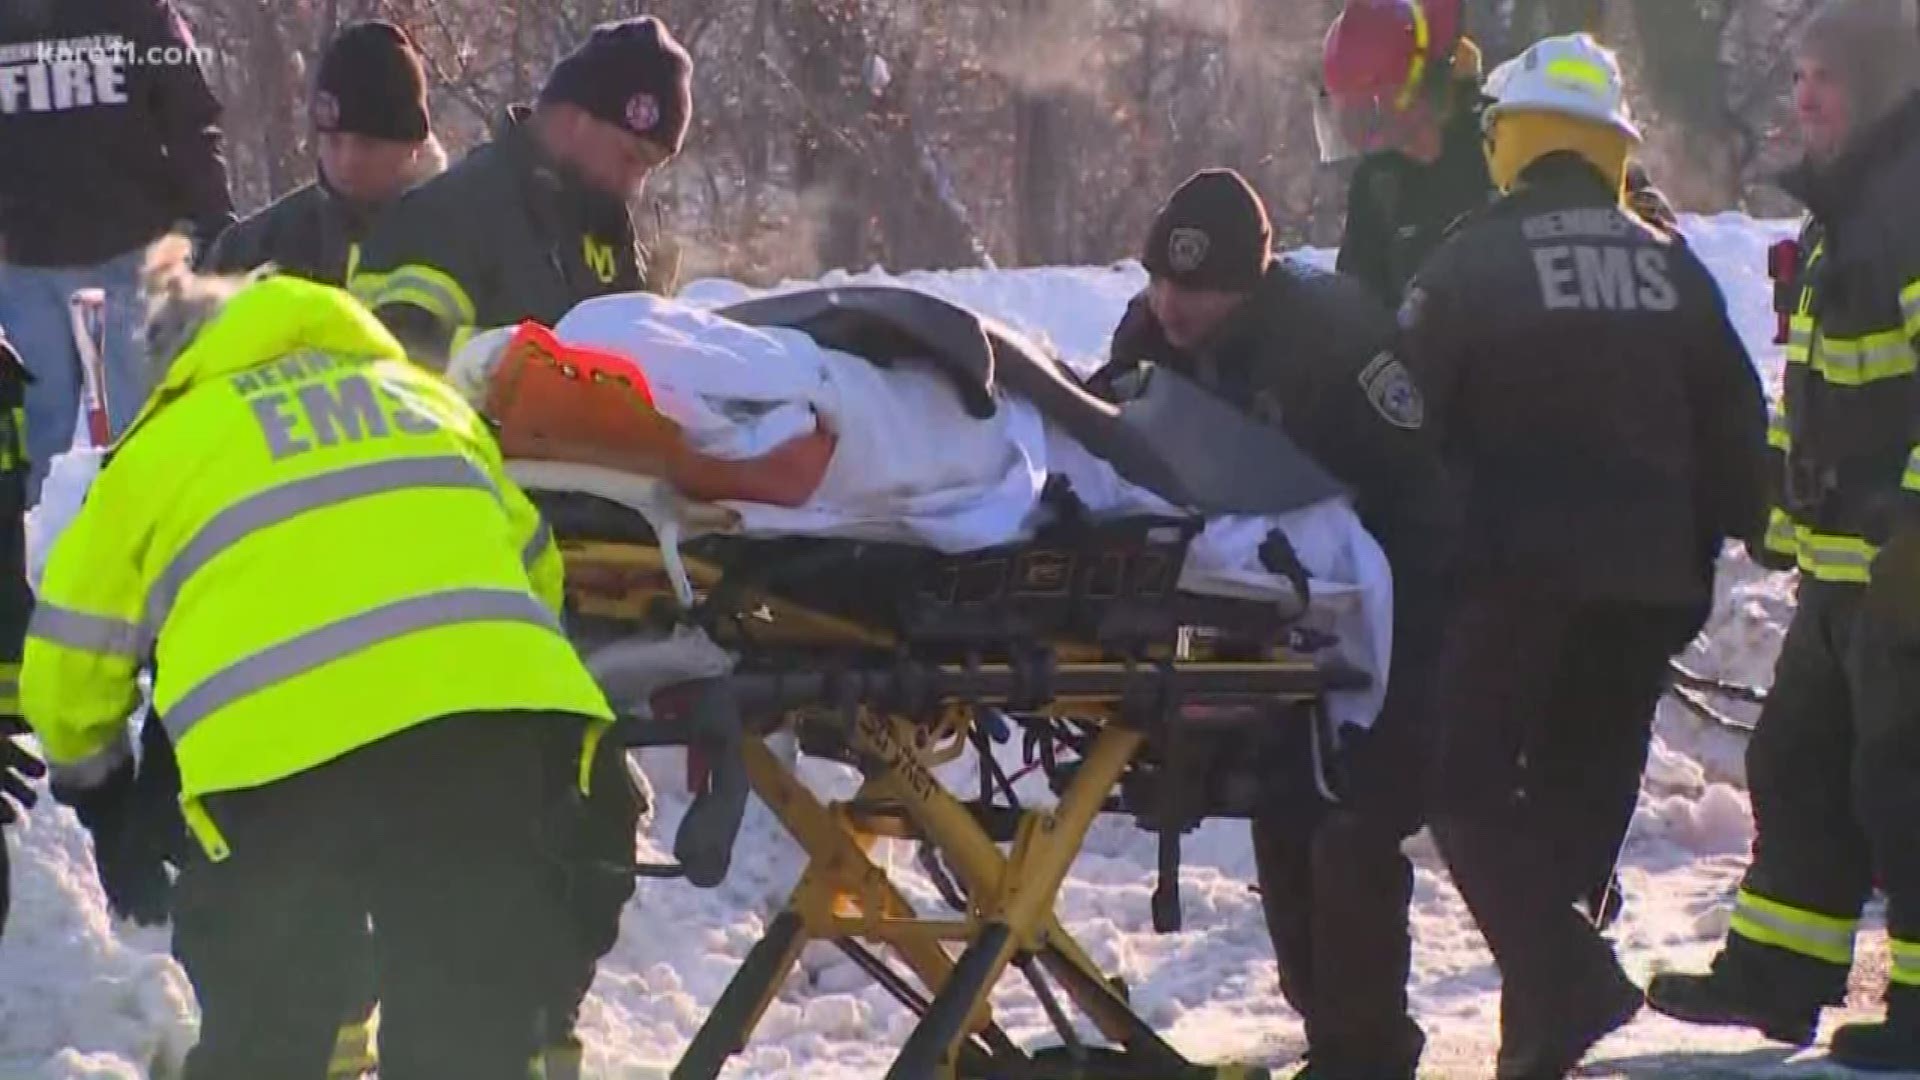 A man is recovering after plunging 150 feet down a cliff and landing on the frozen banks of the Mississippi River in Minneapolis Monday.